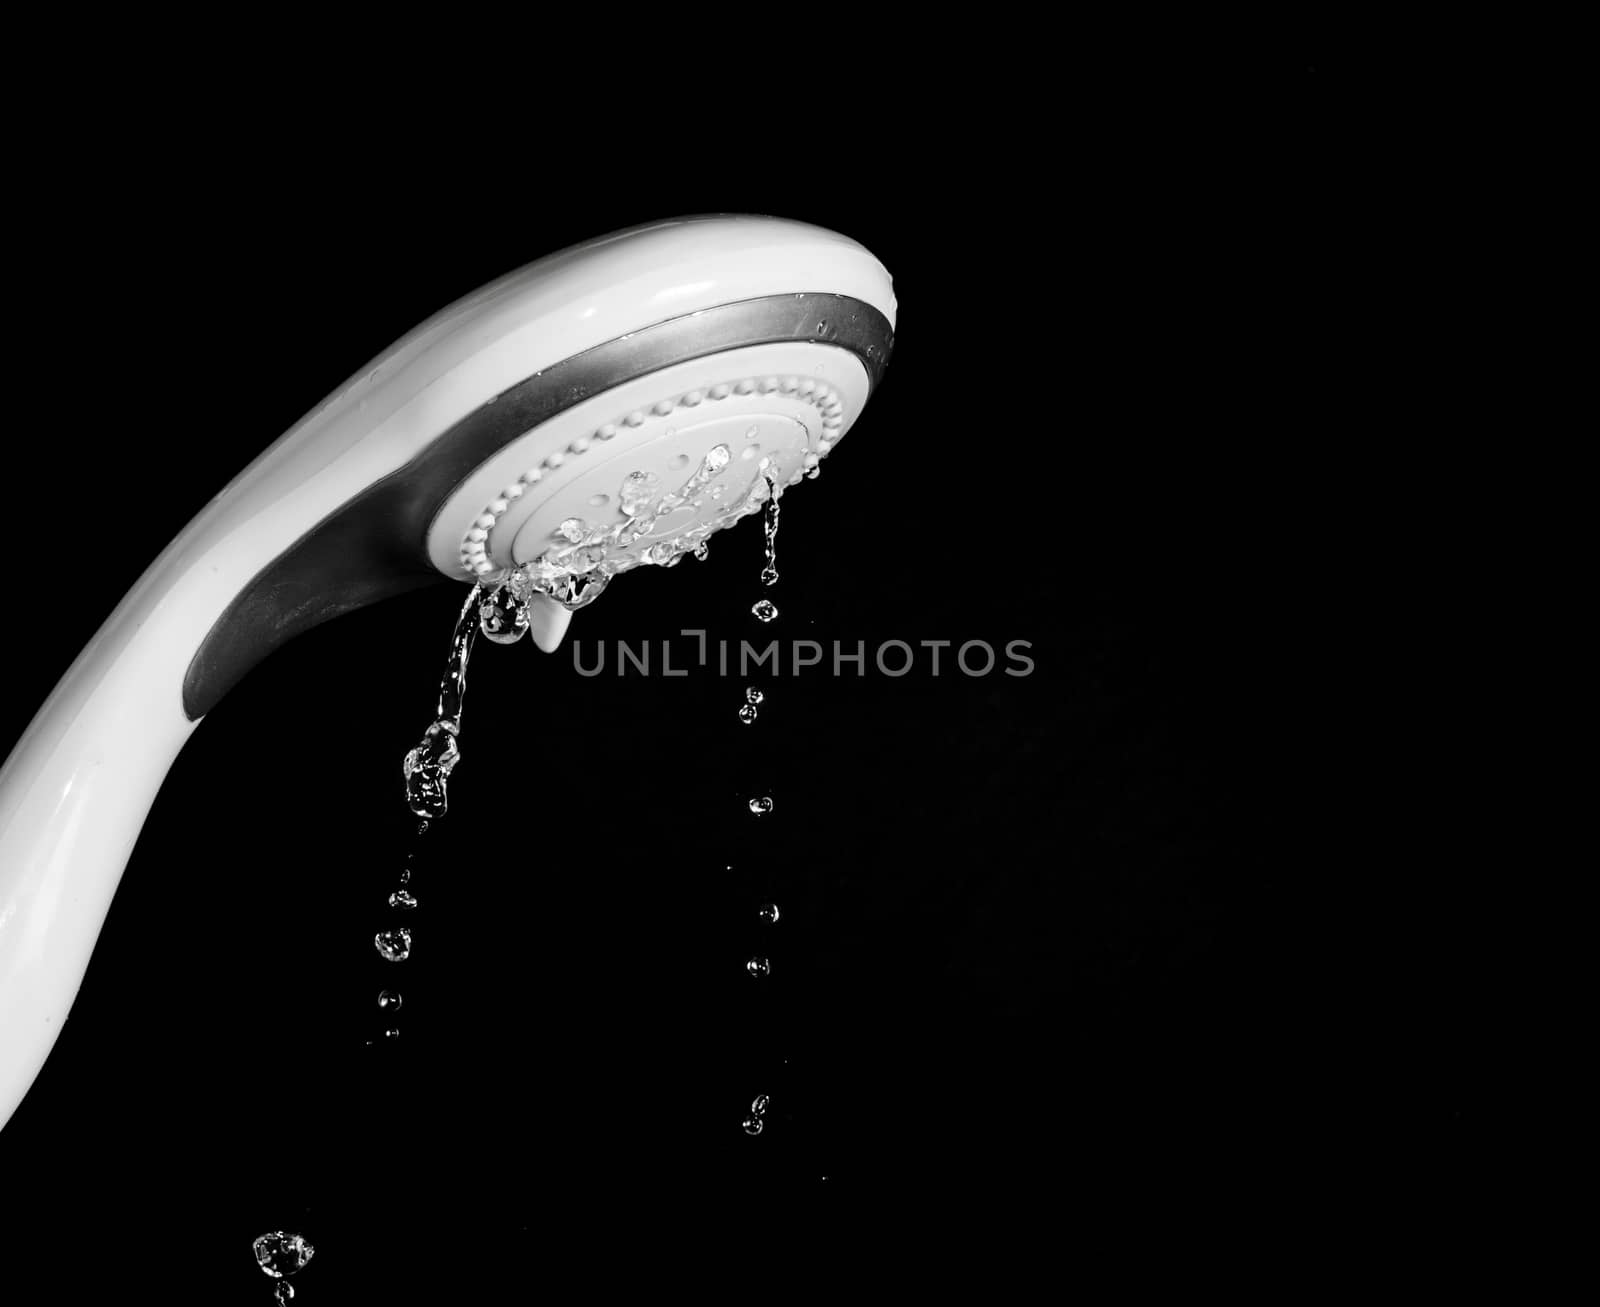 Modern shower head  with running water  isolated on black background by pixbox77